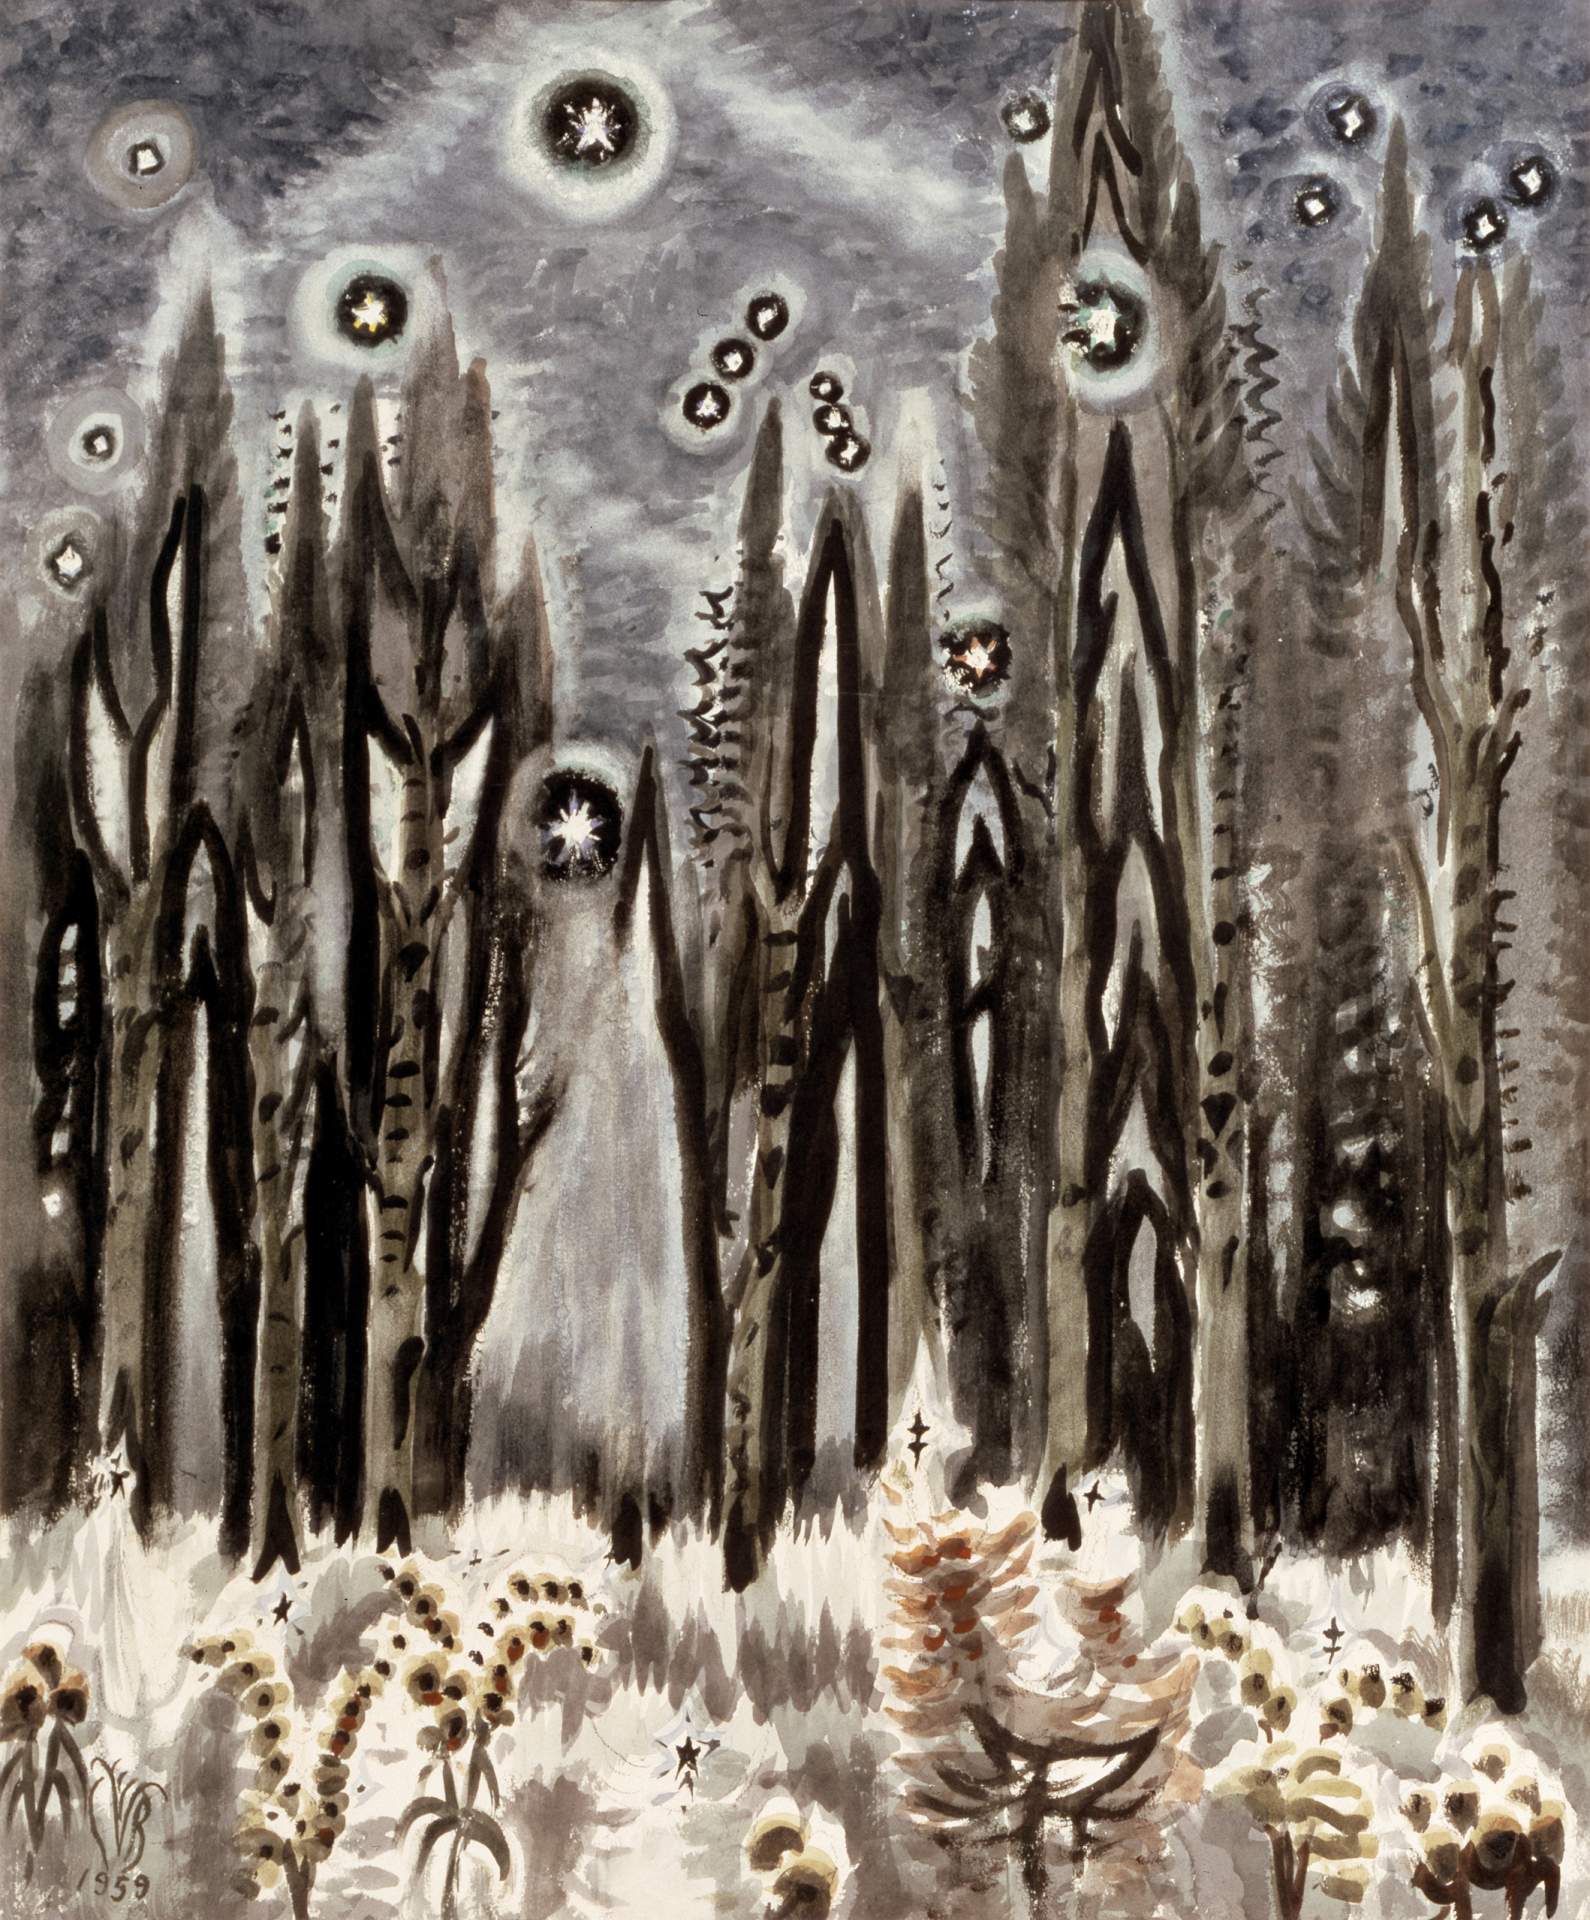 From a letter to Theodor Braasch from Charles Burchfield, December 30, 1959